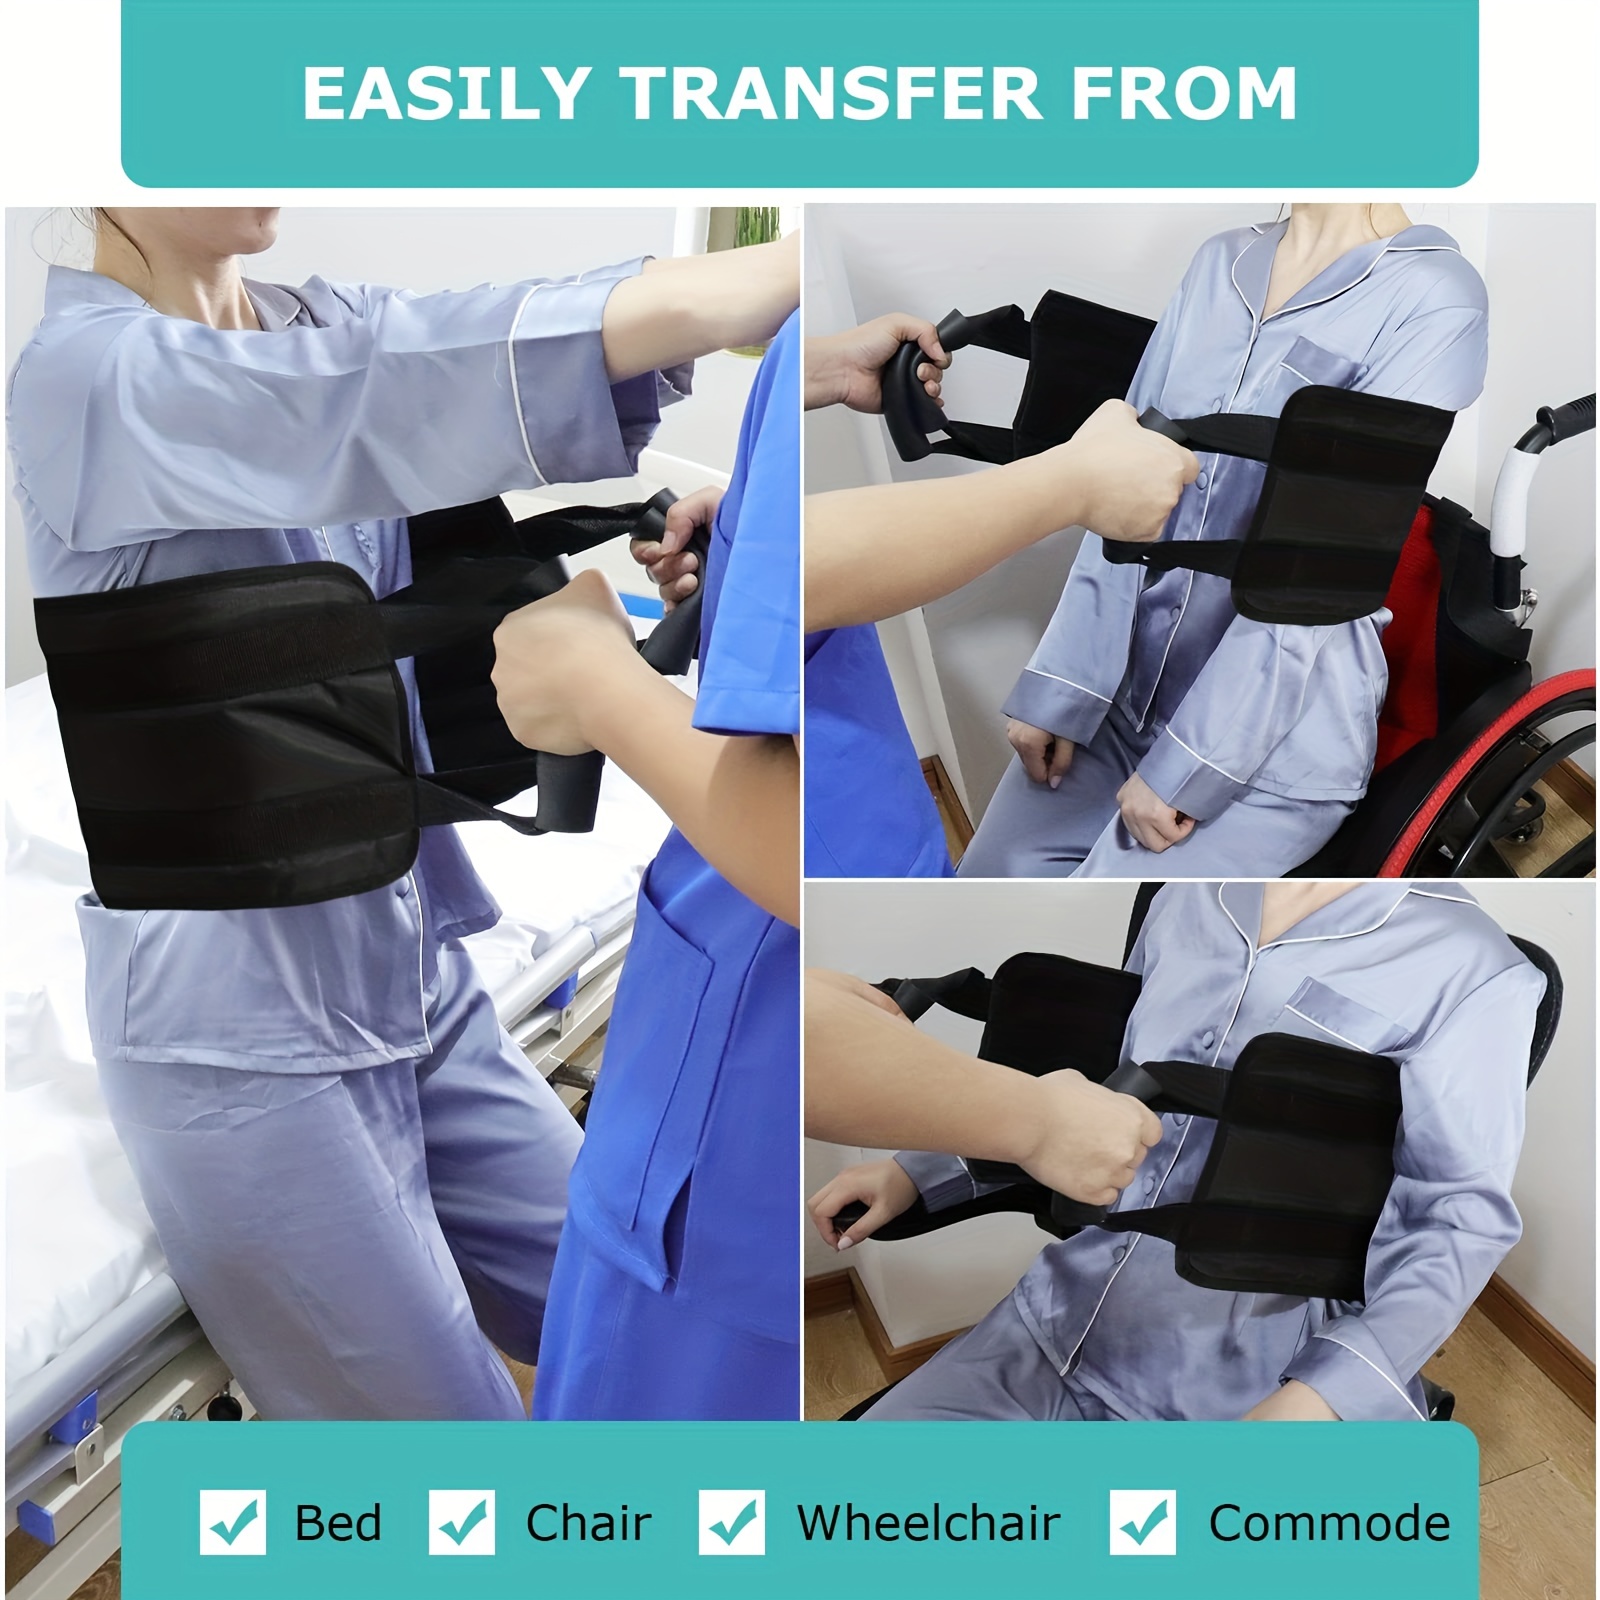 31.5 Inch Padded Bed Transfer Nursing Sling for Patient, Elderly Safety  Lifting Aids Home Bed Assist Handle Back Lift Mobility Belt for Patient Care